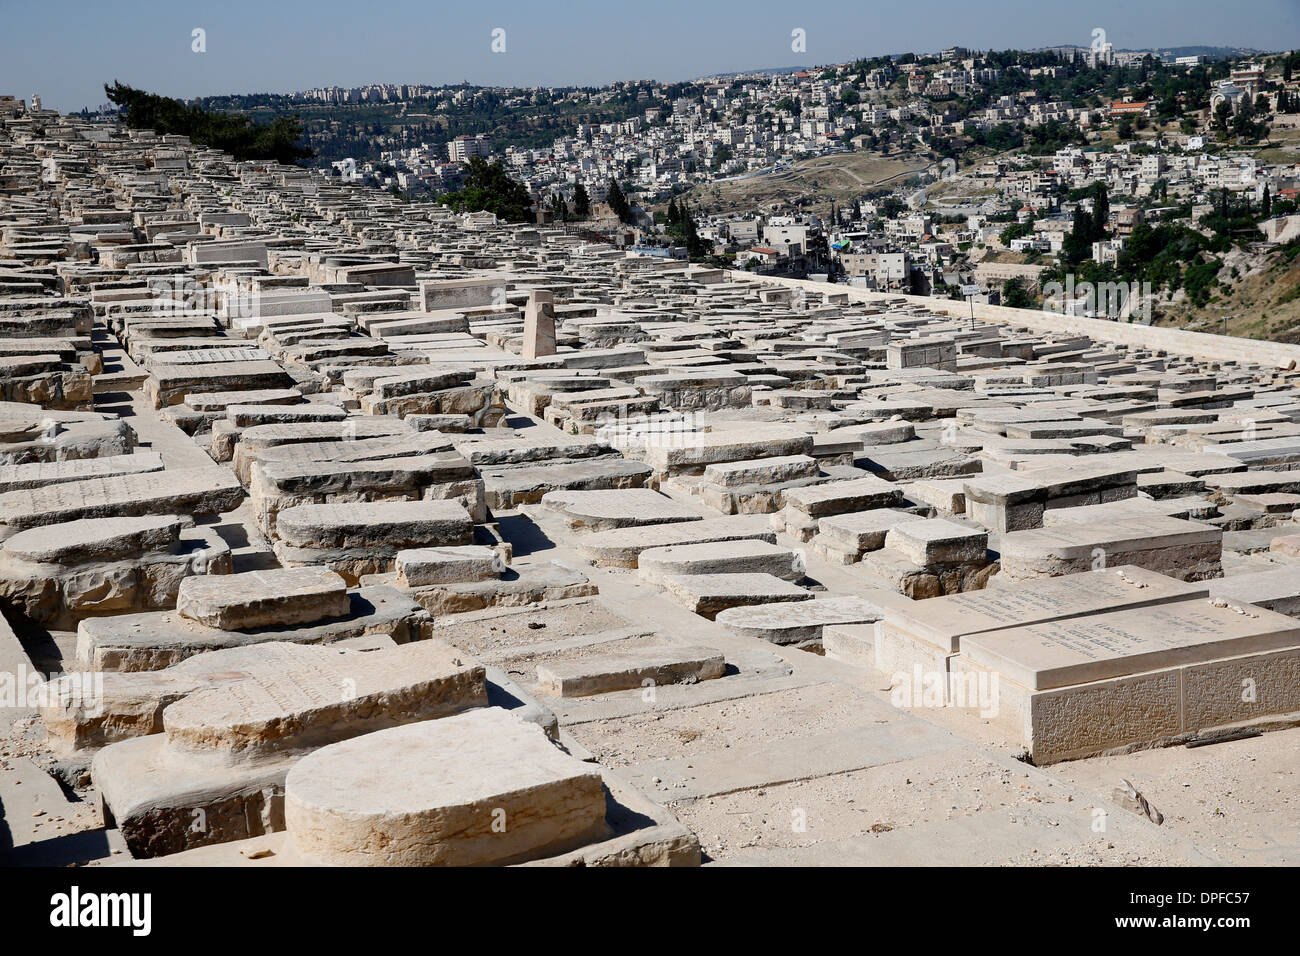 Gravestones among the 150,000 graves in the Jewish Cemetery on the Mount of Olives, Jerusalem, Israel, Middle East Stock Photo